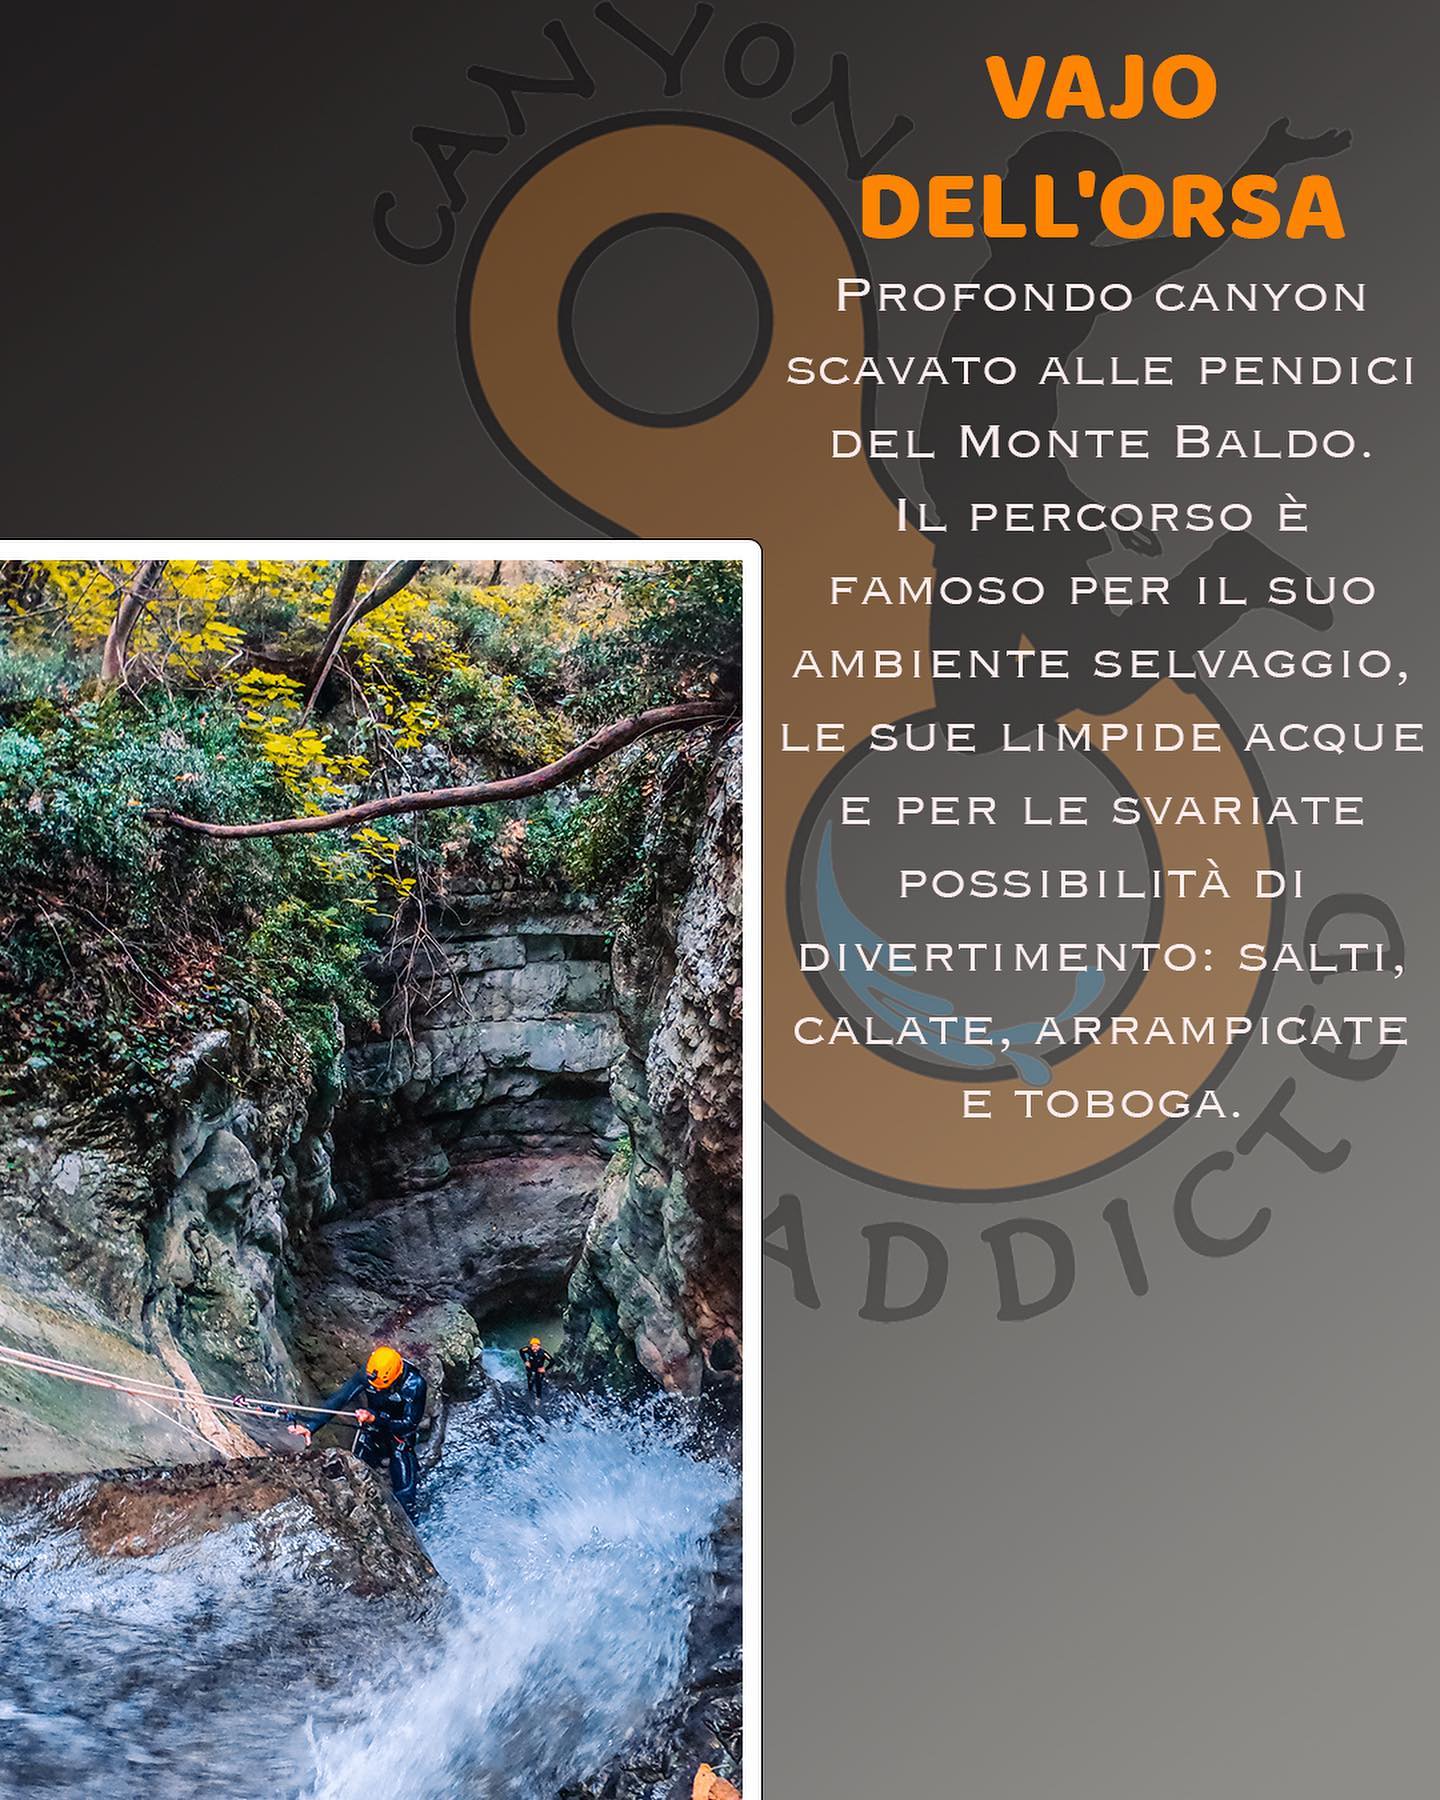 Today we present one of our itineraries IL VAJO DELL'ORSA • • • Deep c ...
